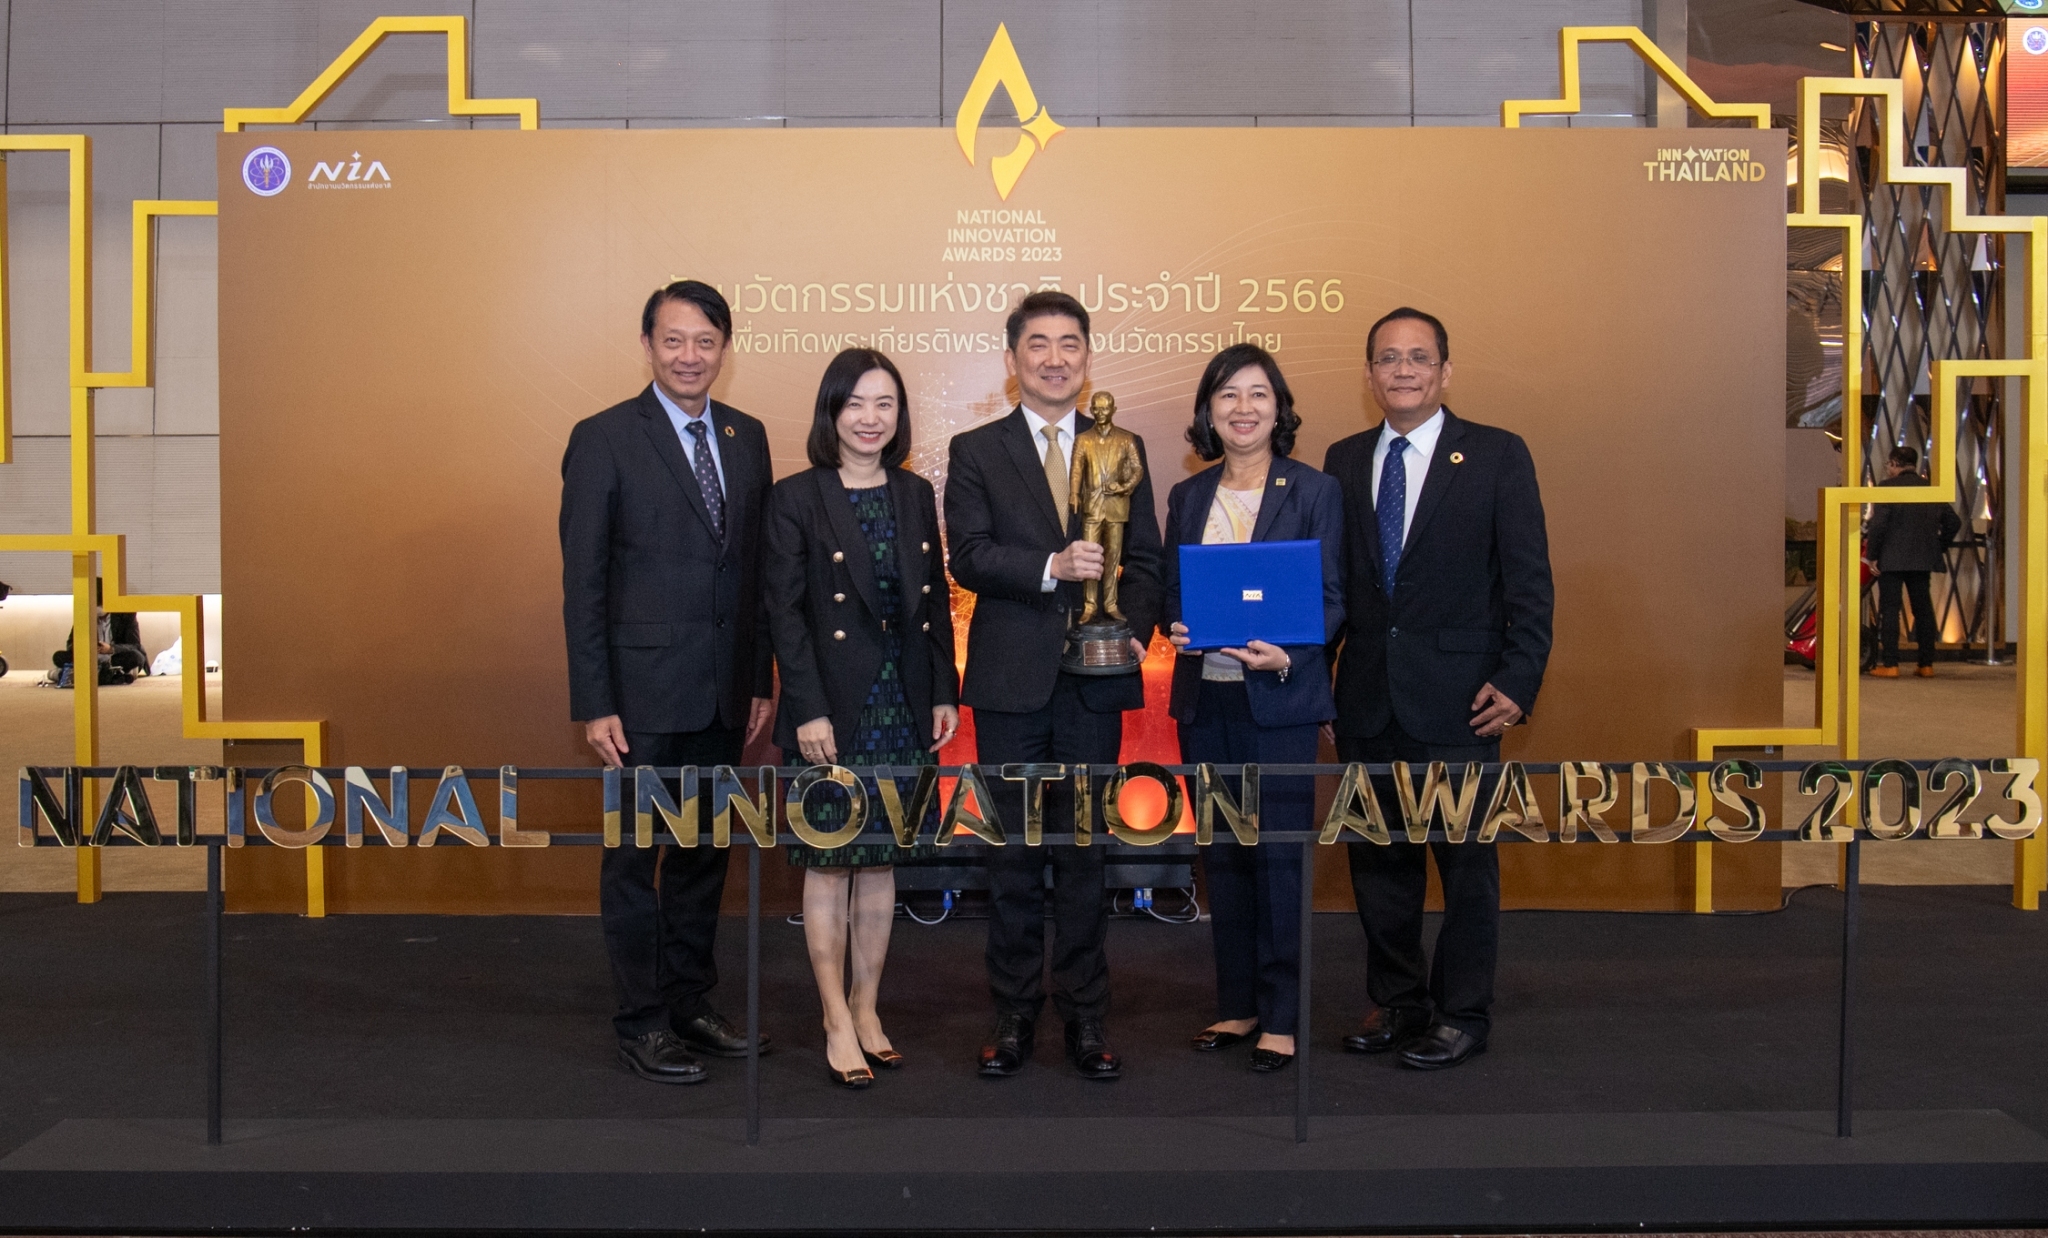 CP Foods’ "Thai Food - Mission to Space" Project Honored with the 2023 "National Innovation Award"